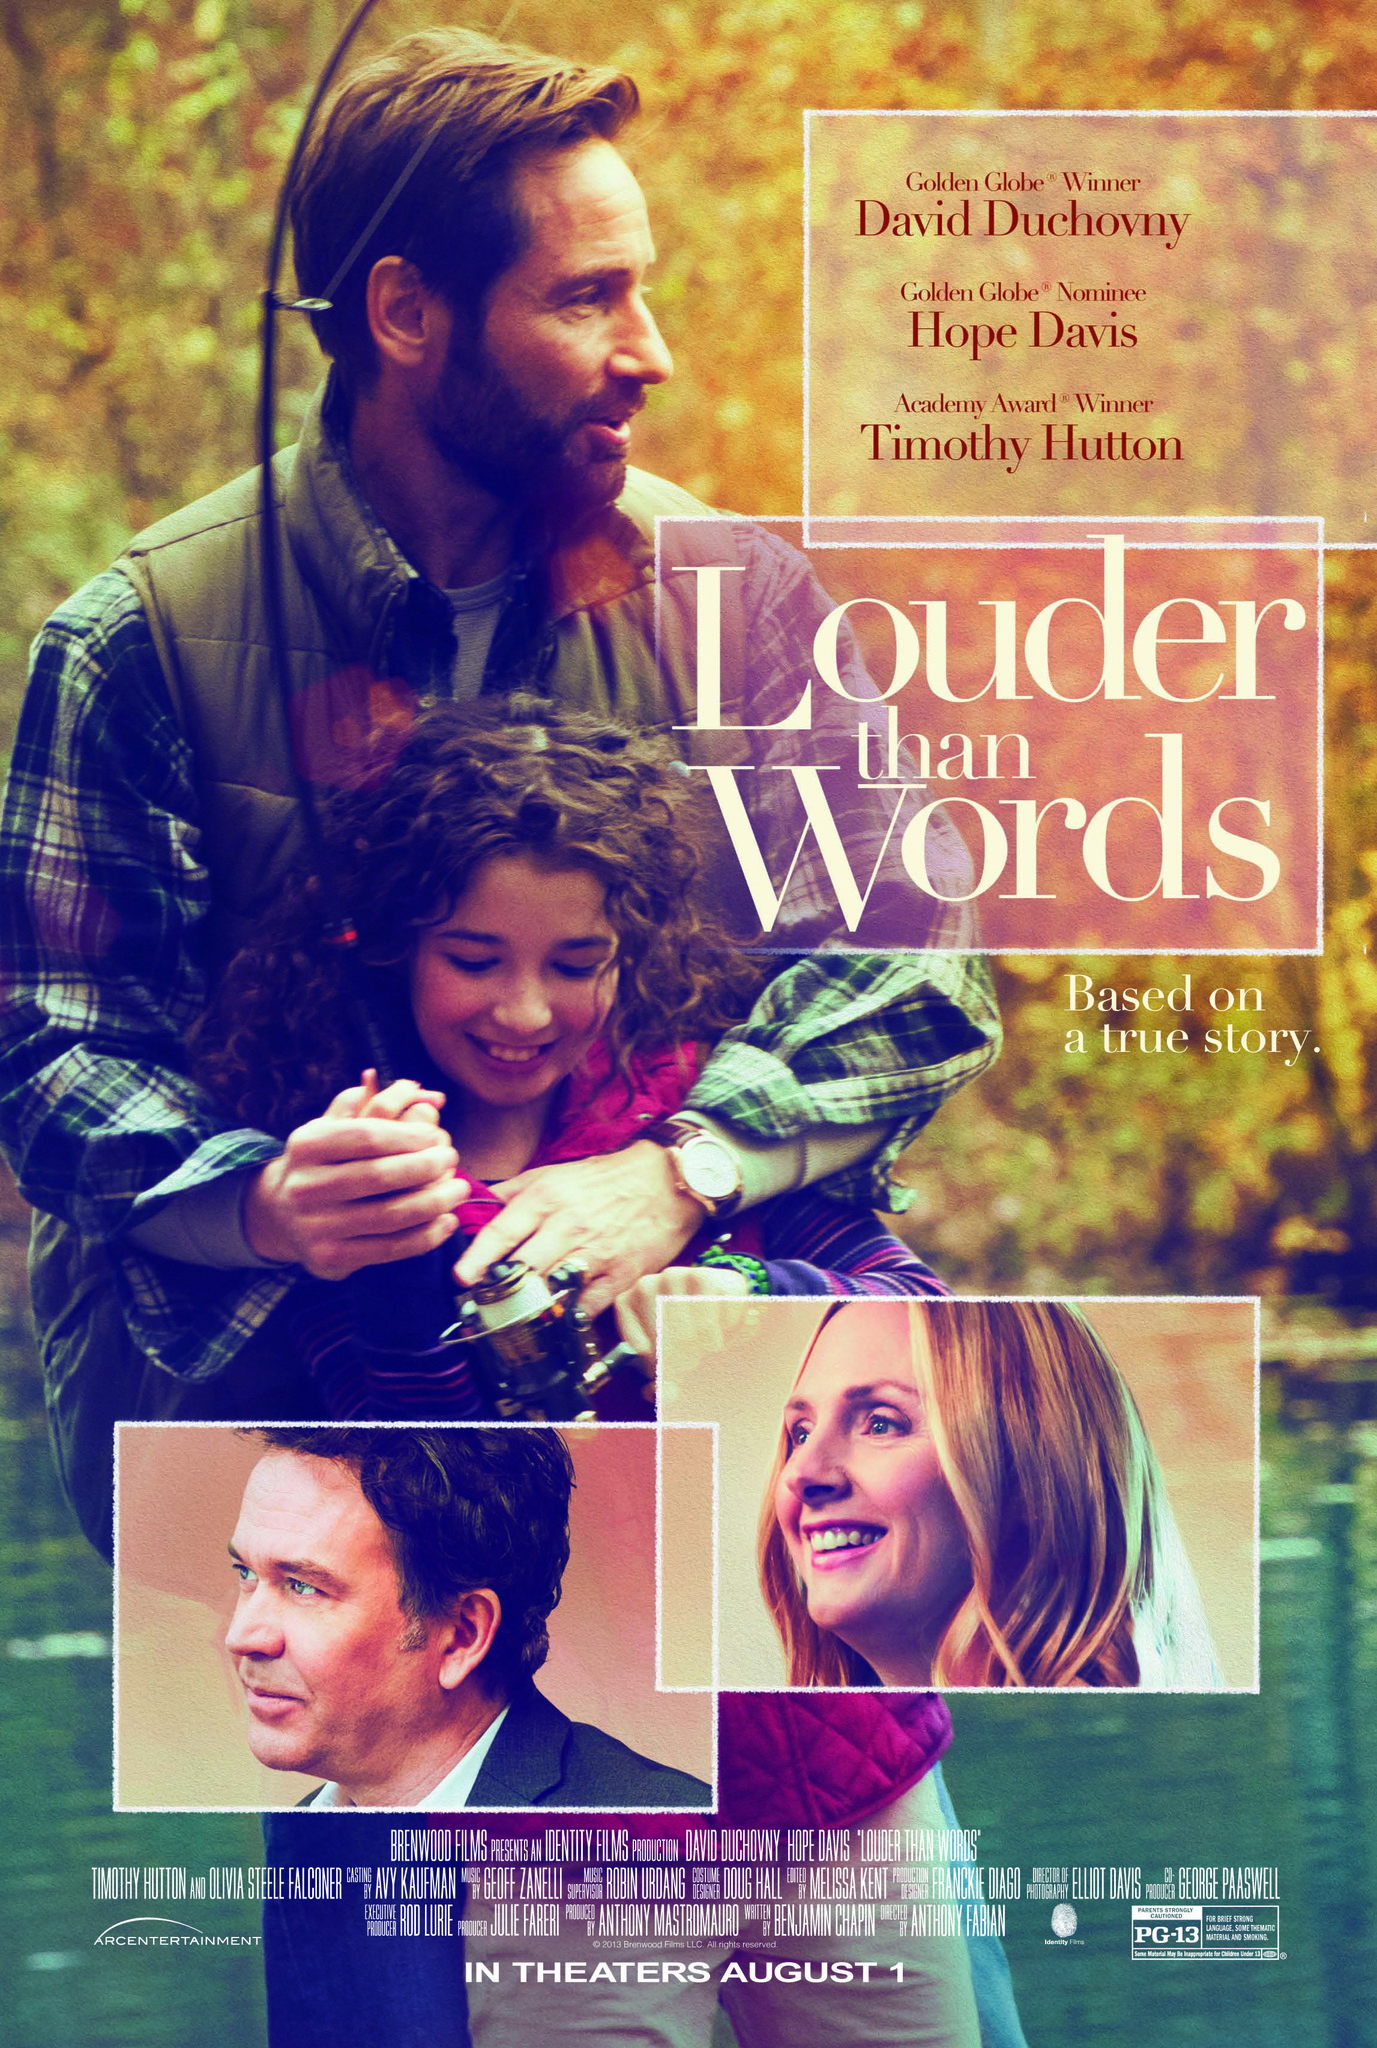 David Duchovny, Timothy Hutton, Hope Davis and Olivia Steele Falconer in Louder Than Words (2013)